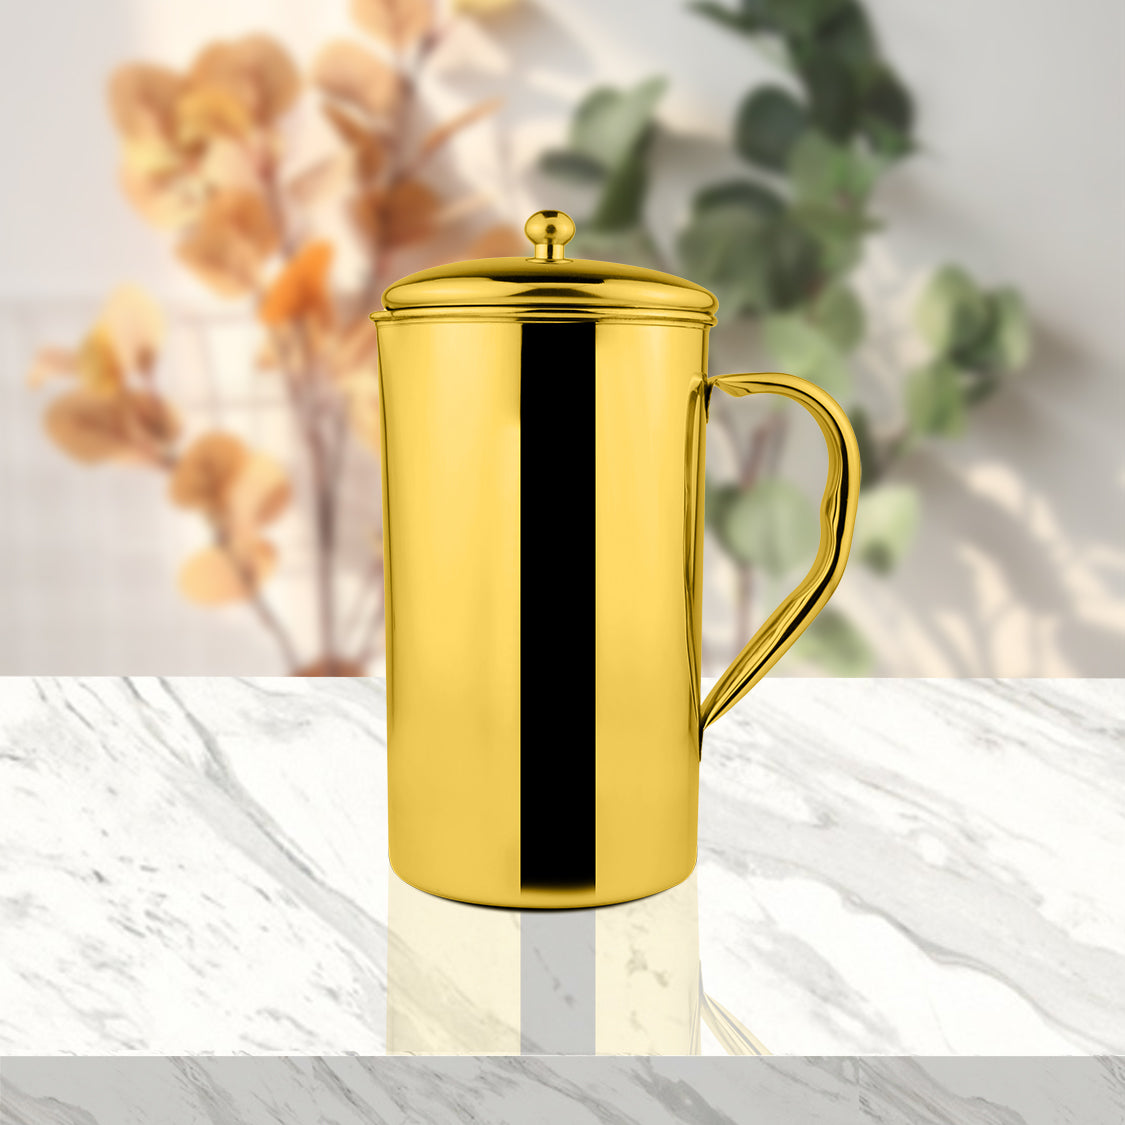 Stainless Steel 1700 ML Jug with Gold PVD Coating Impression